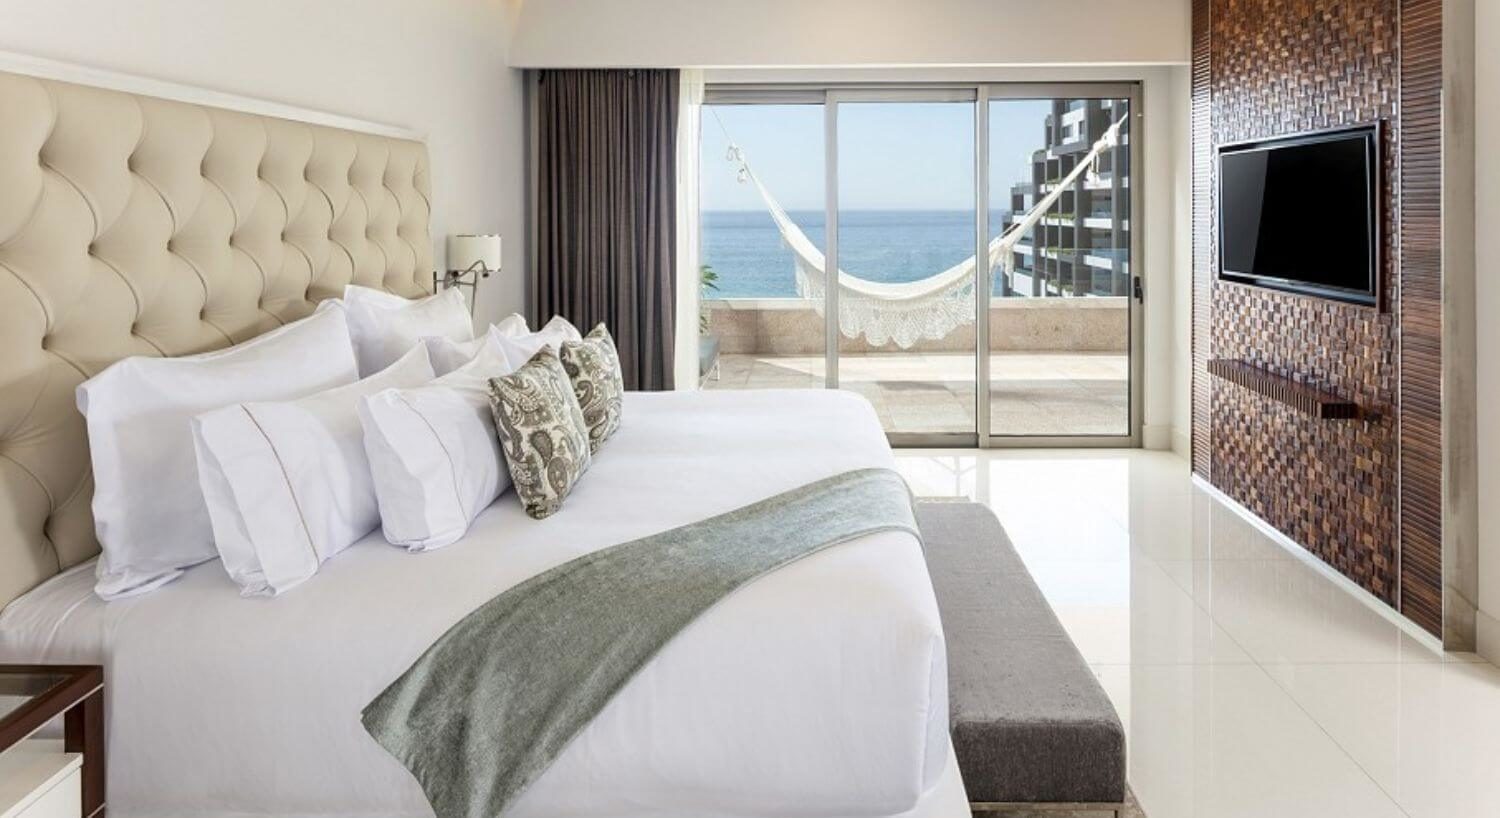 A bedroom with a king bed with plush headboard, a sitting bench at the foot of the bed, a flat screen TV on the opposite wall, and sliding doors leading out to a private balcony with patio furniture, hammock, and ocean views.